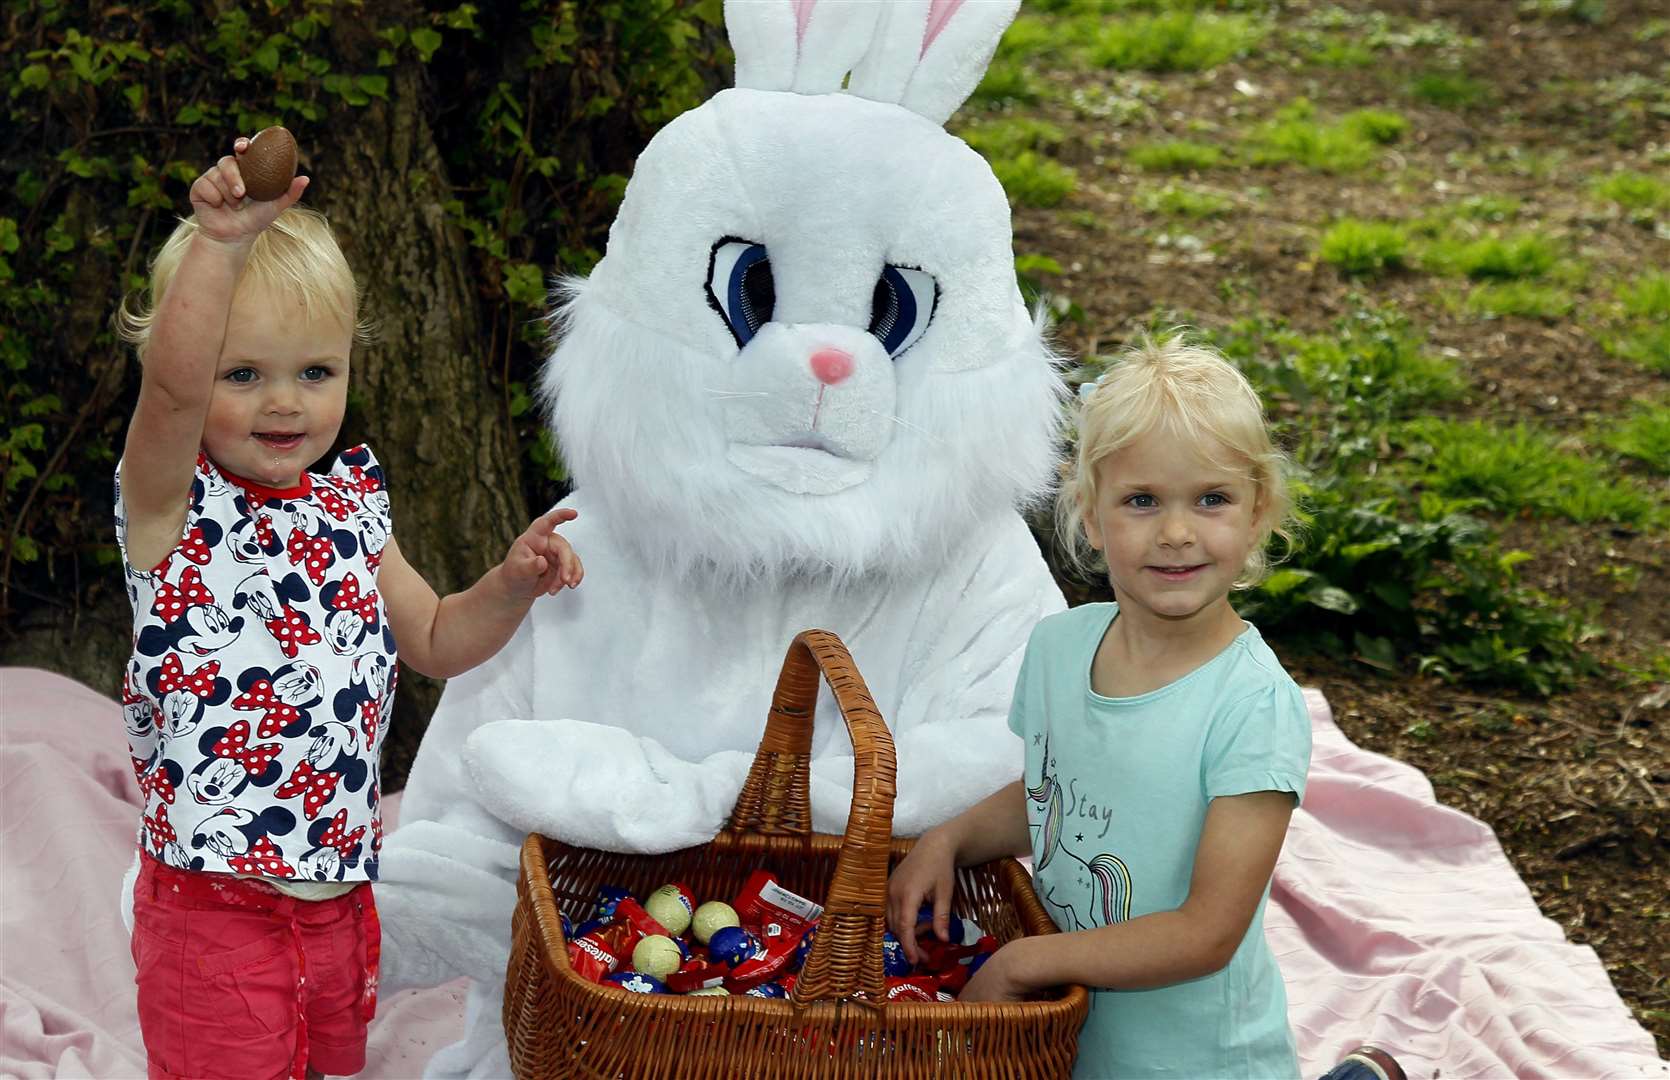 The Easter Bunny spends Easter busily hiding eggs for children - and adults - to find